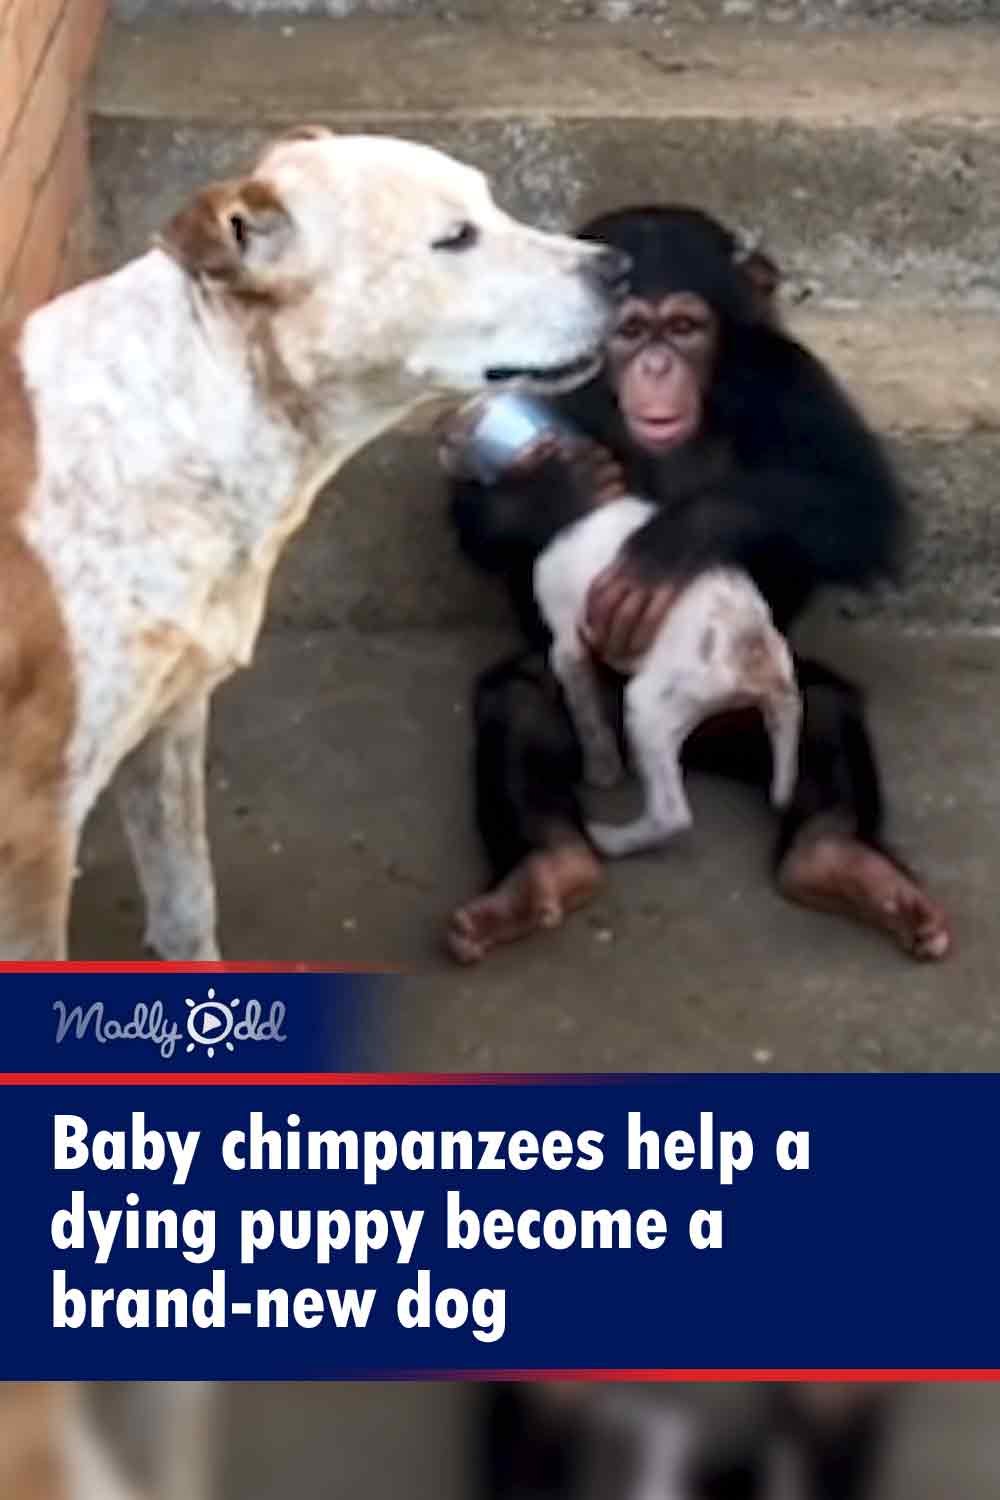 Baby chimpanzees help a dying puppy become a brand-new dog